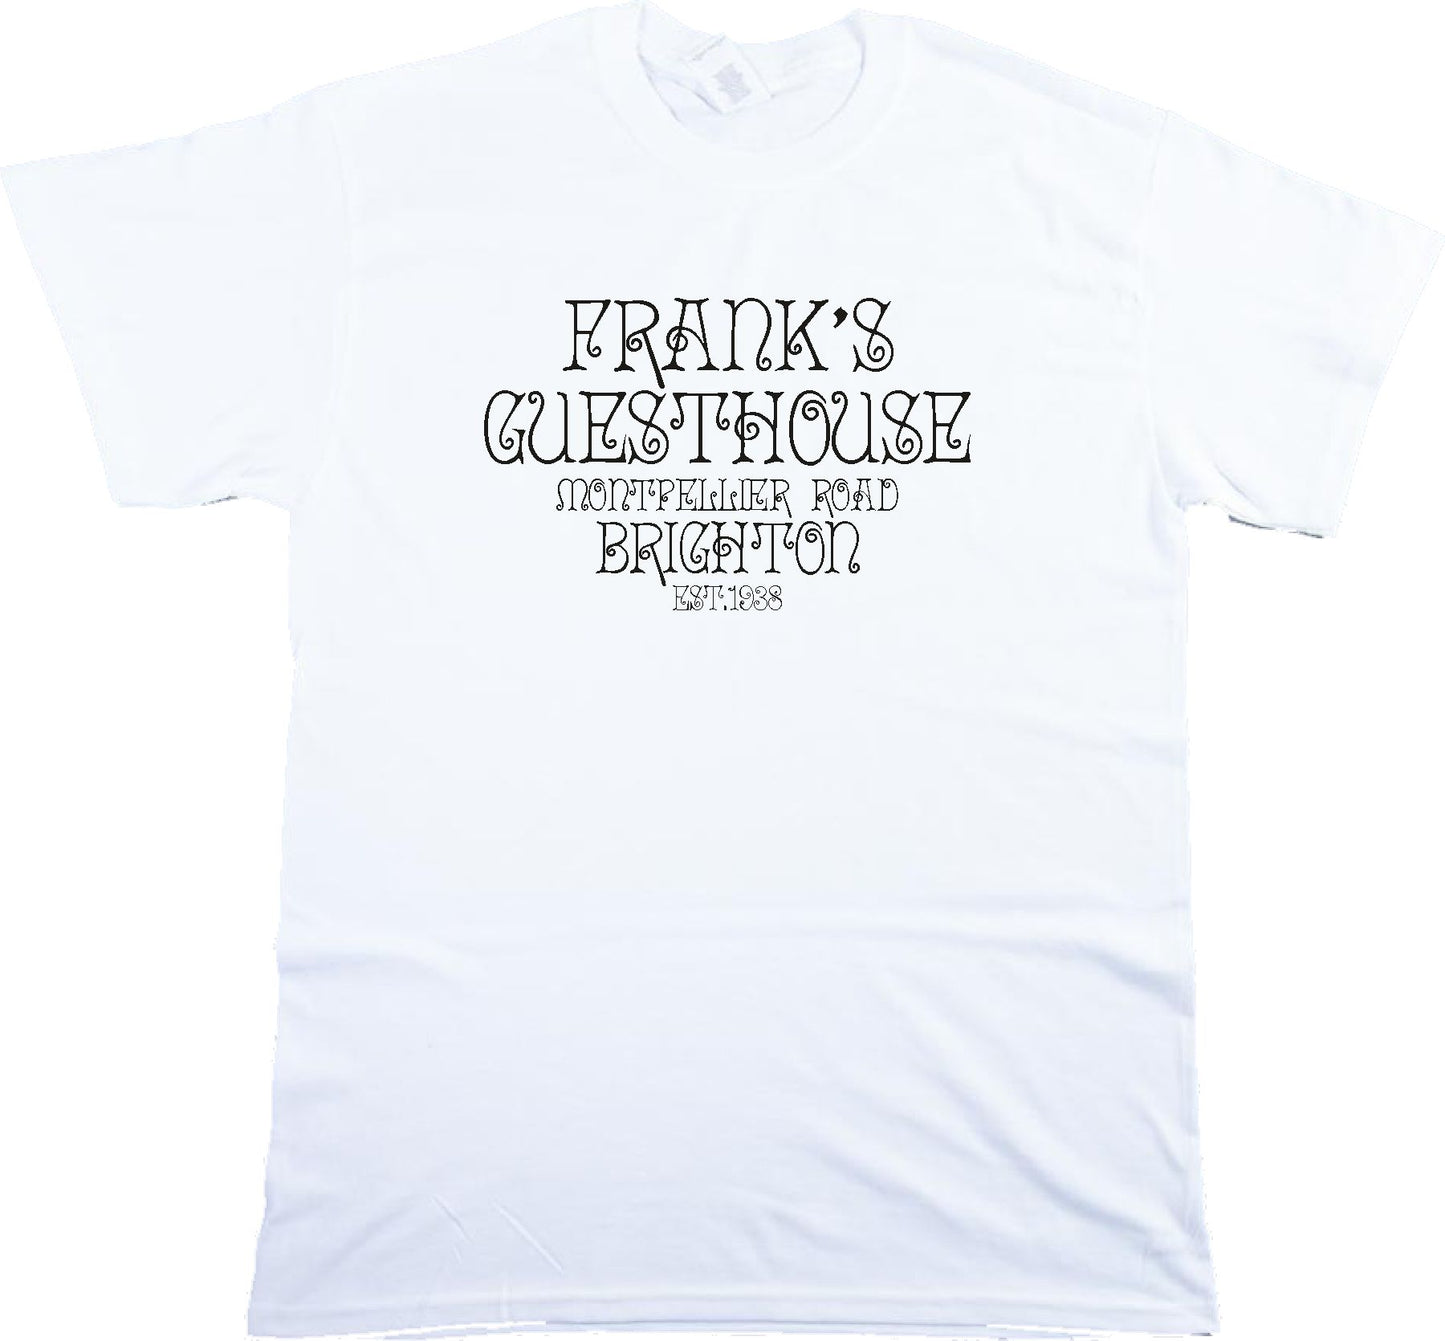 Brighton Rock T-Shirt - 'Frank's Guesthouse', Pinkie, Novel, Various Colours